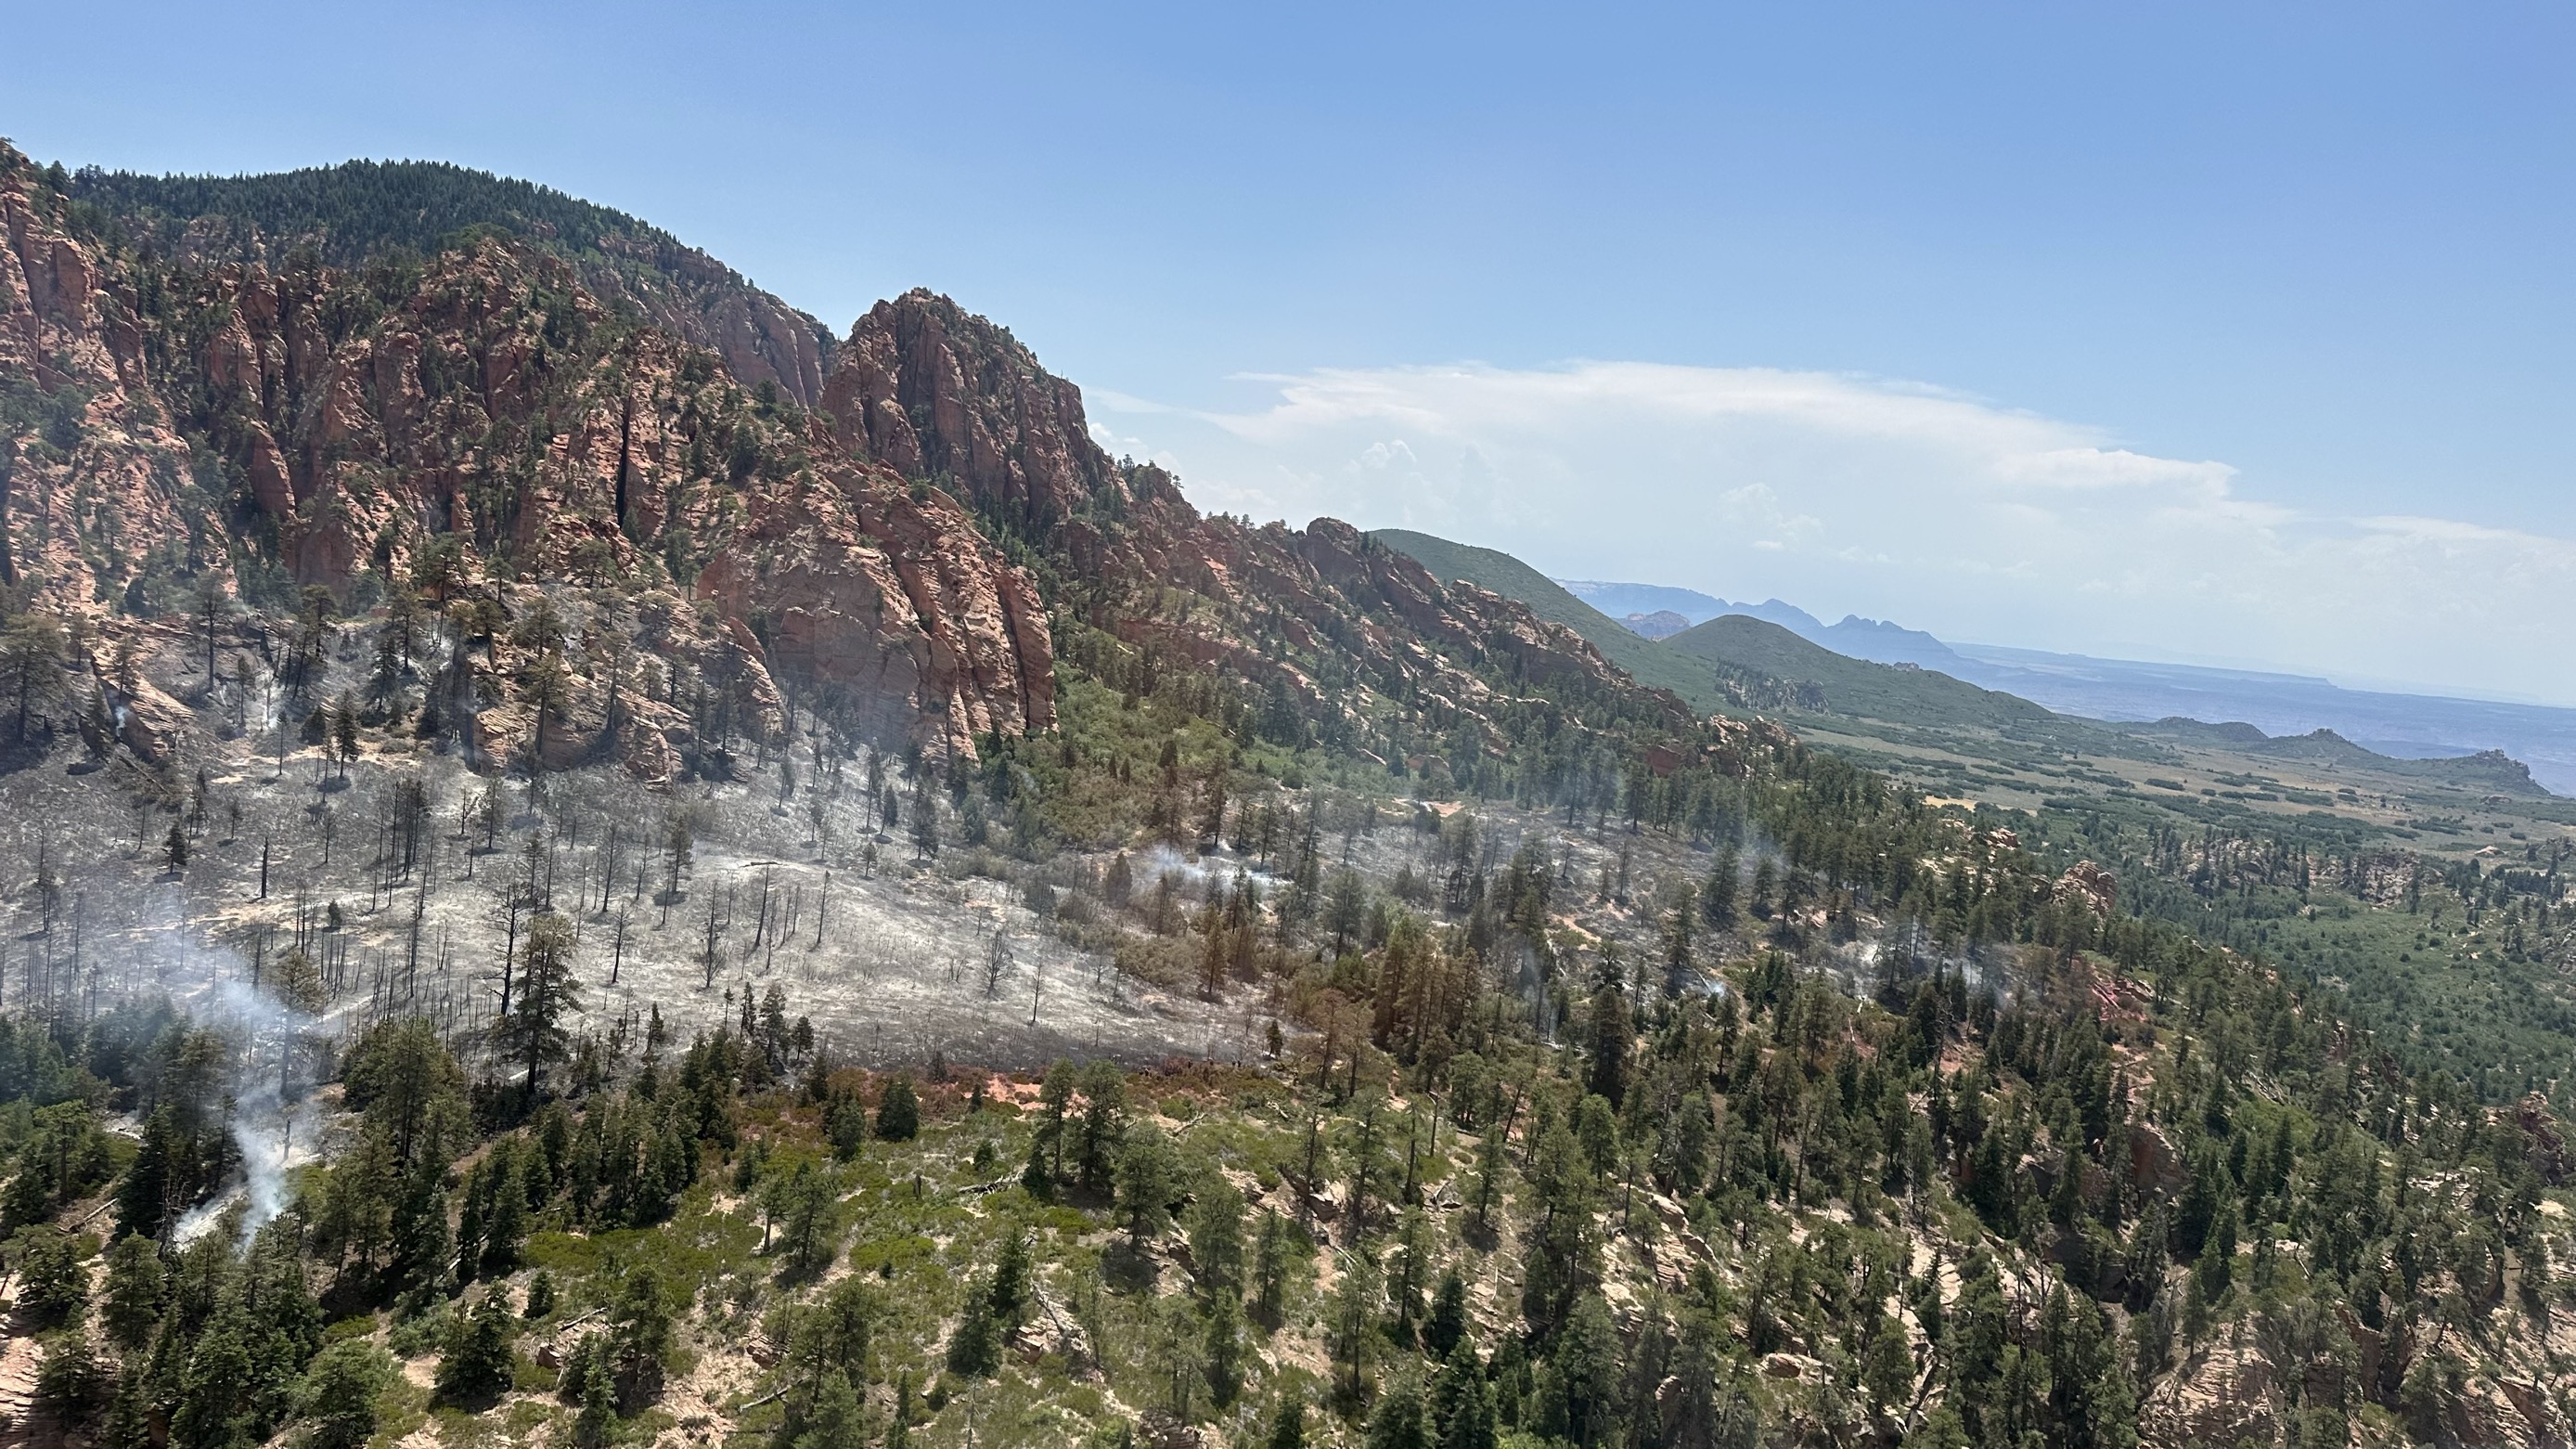 Smoke and dead trees on top sandstone cliffs and canyons surrounded by other trees